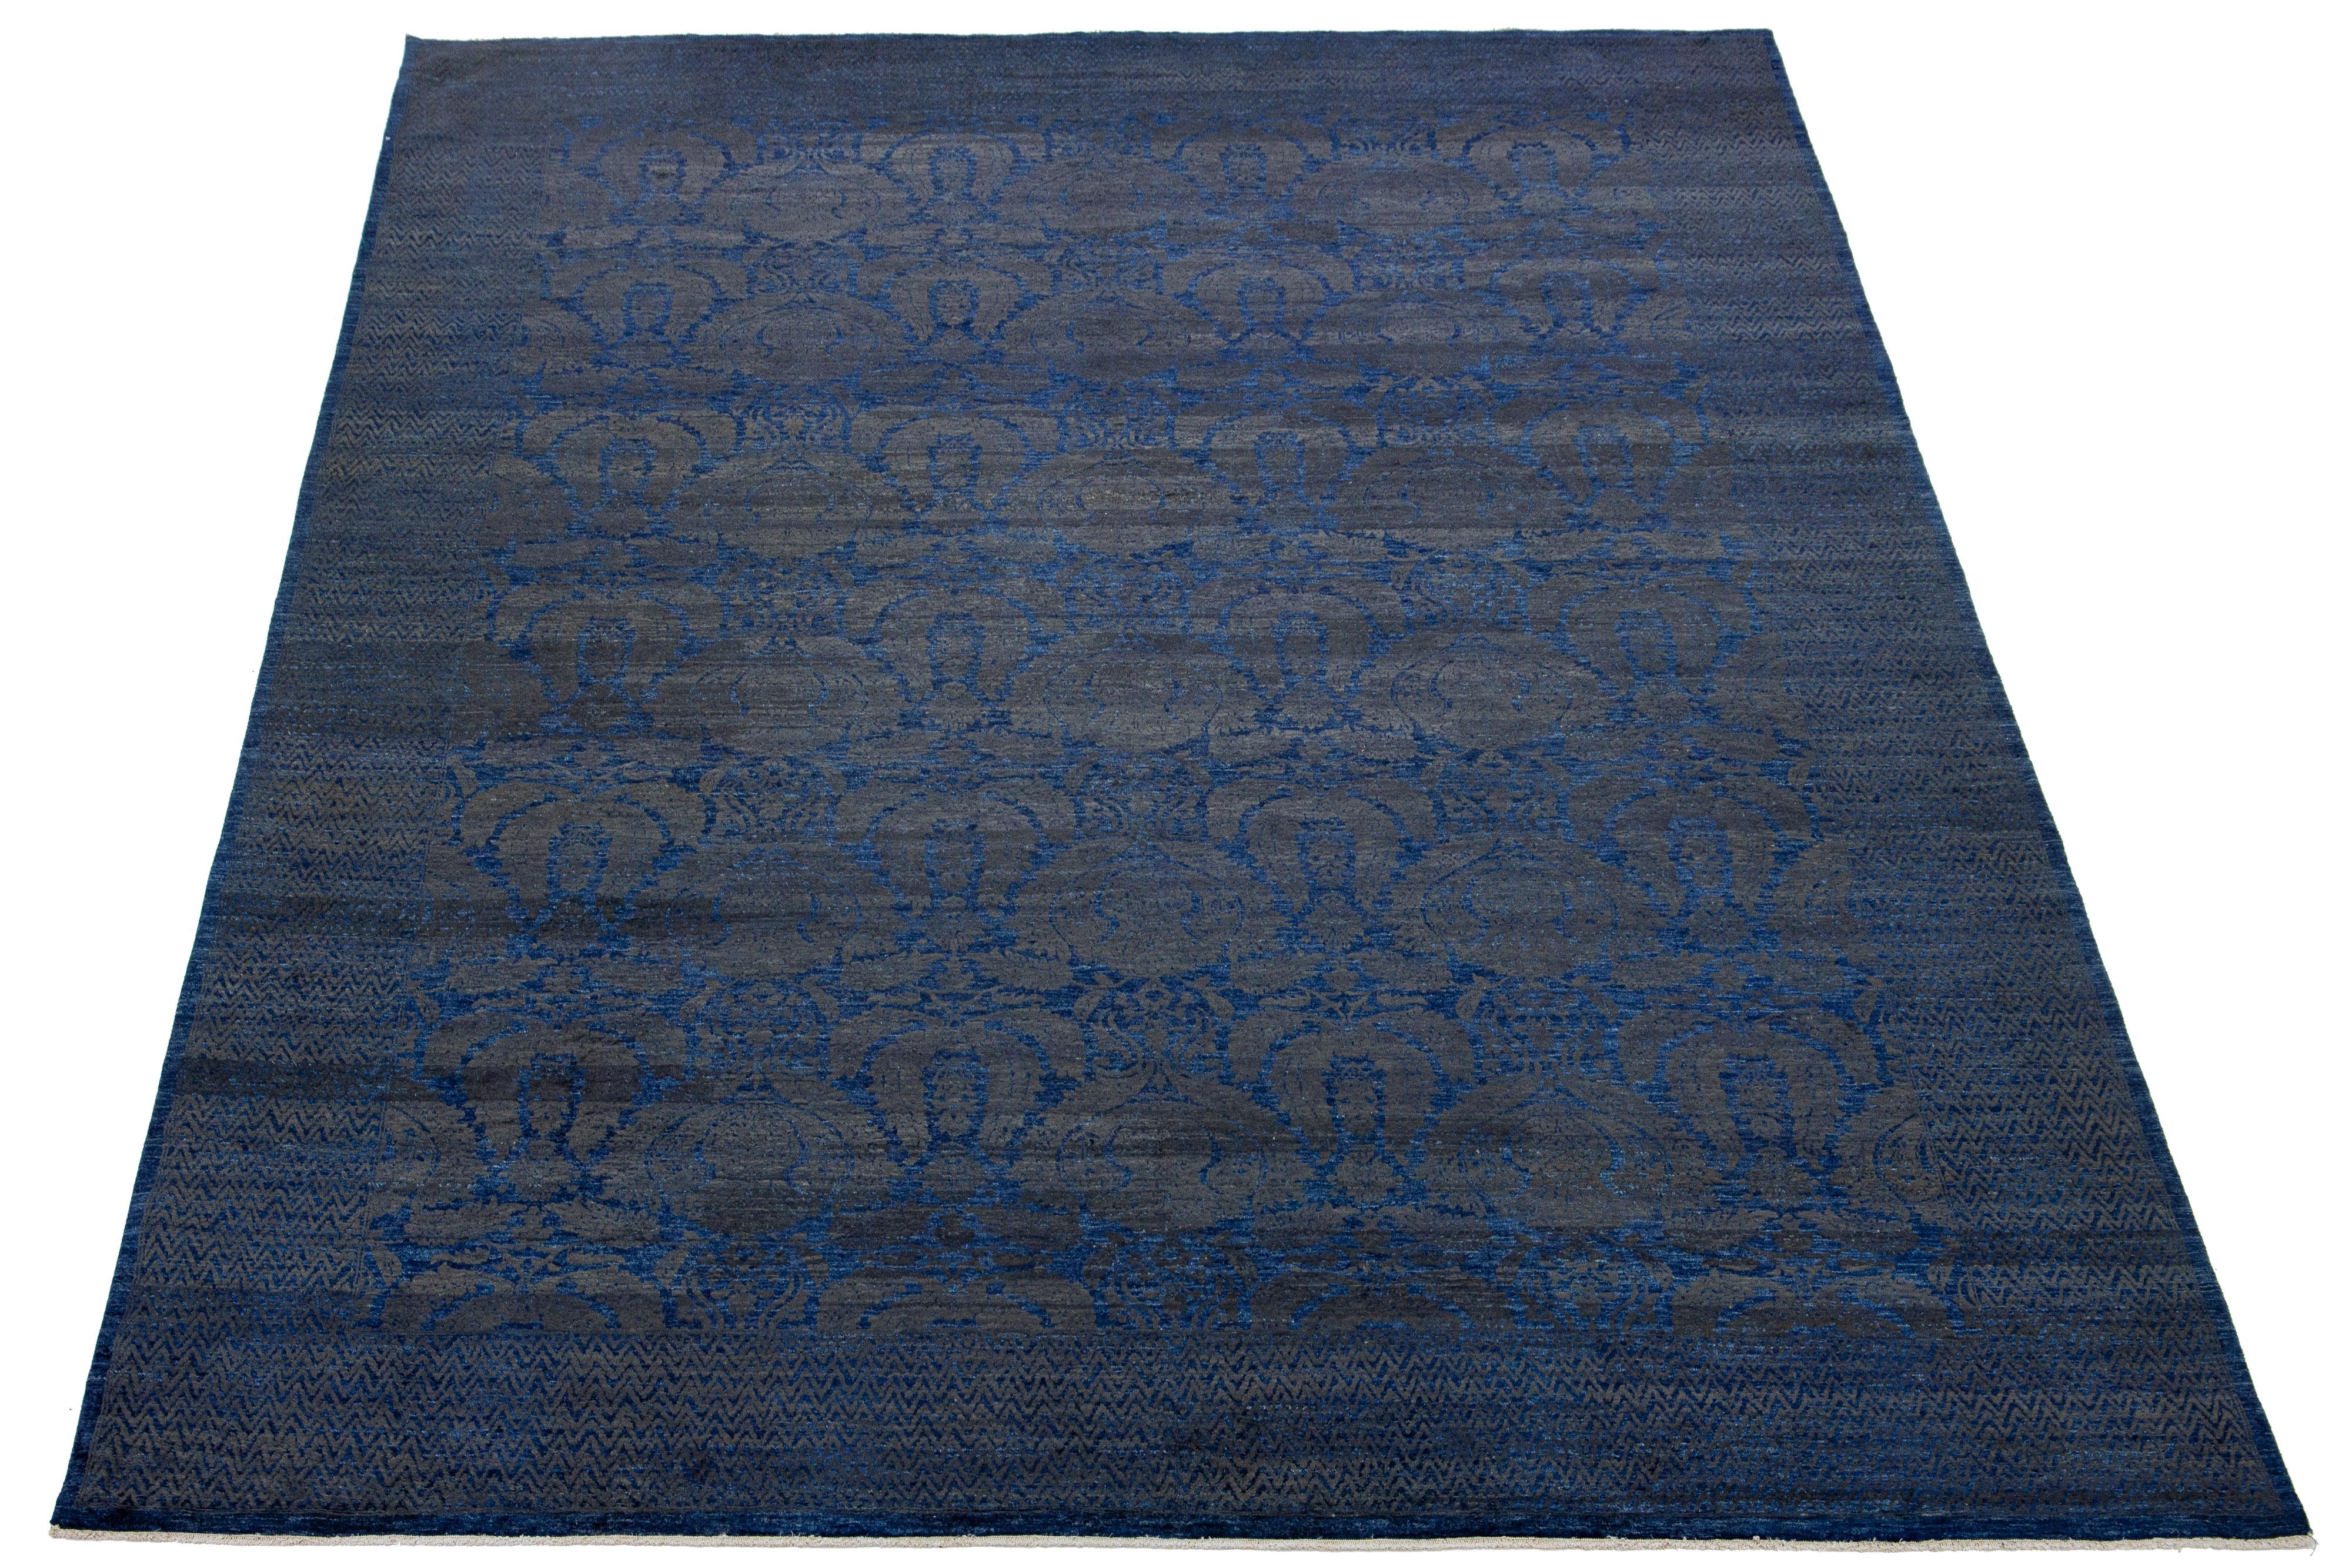 This oversized hand-knotted wool rug showcases a dark gray field. It's designed with a stunning allover floral pattern and accented with navy blue hues in a Transitional allure.

This rug measures 9'10